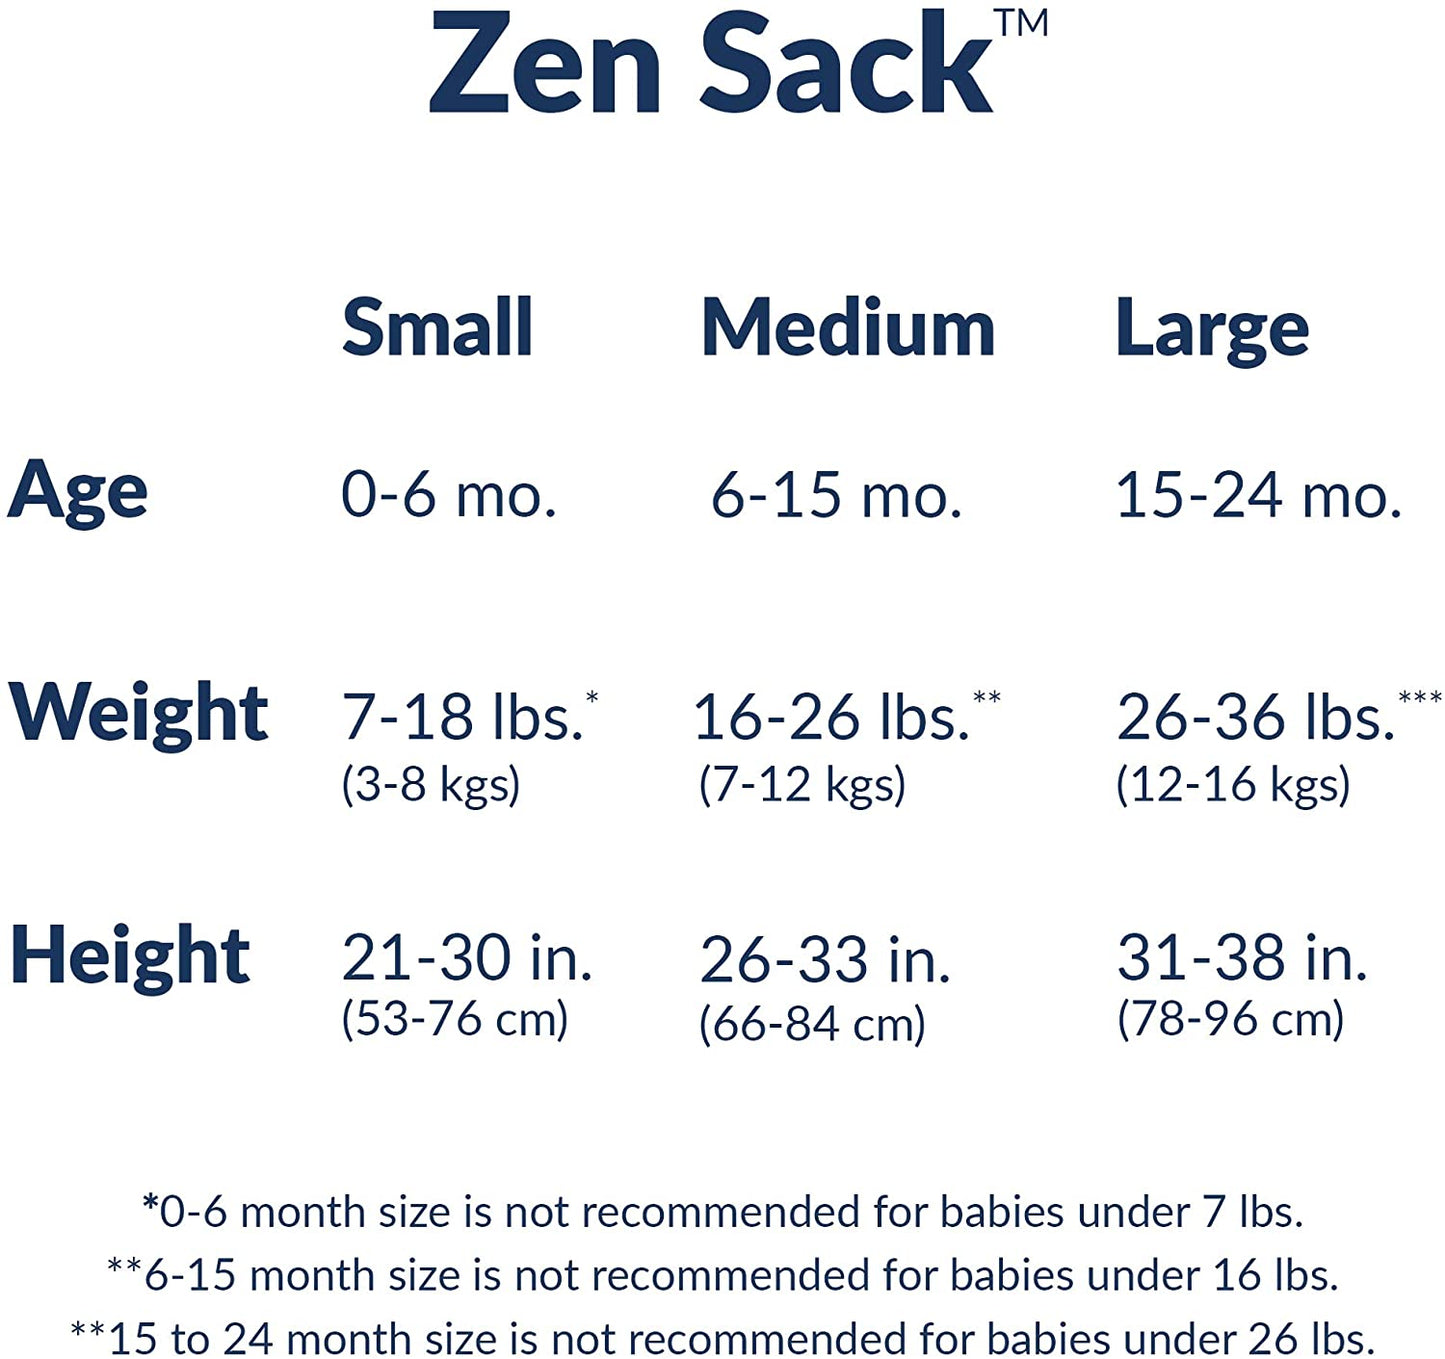 Nested Bean Zen Sack - Gently Weighted Sleep Sacks | Baby: 0-6 Months | Cotton 100% | Help Newborn/Infant Swaddle Transition | 2-Way Zipper | Machine Washable - (For 6 piece(s))